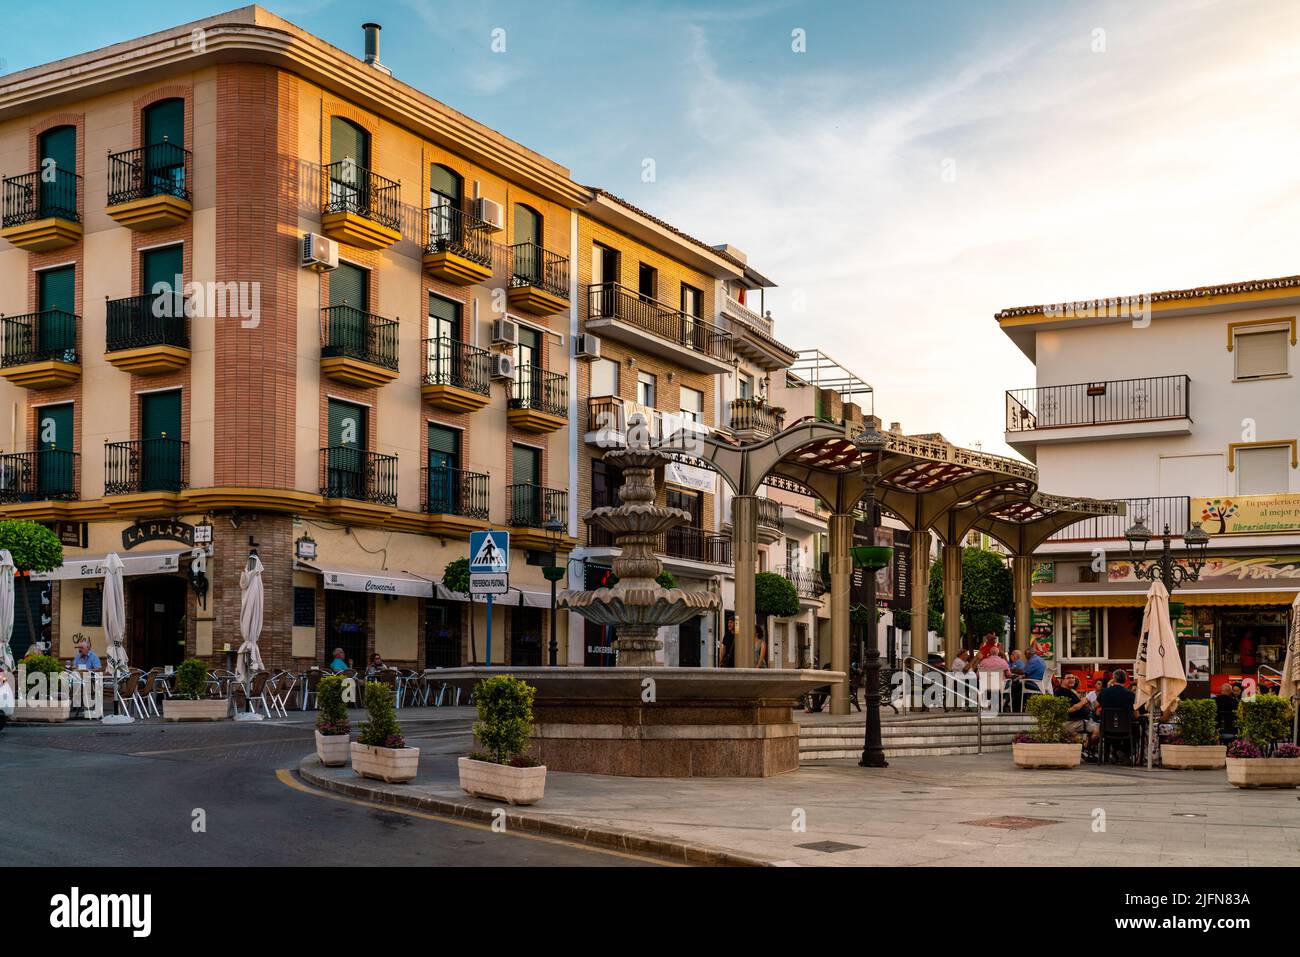 City center of this Andalusian city. Typically architecture for South of Spain. Stock Photo